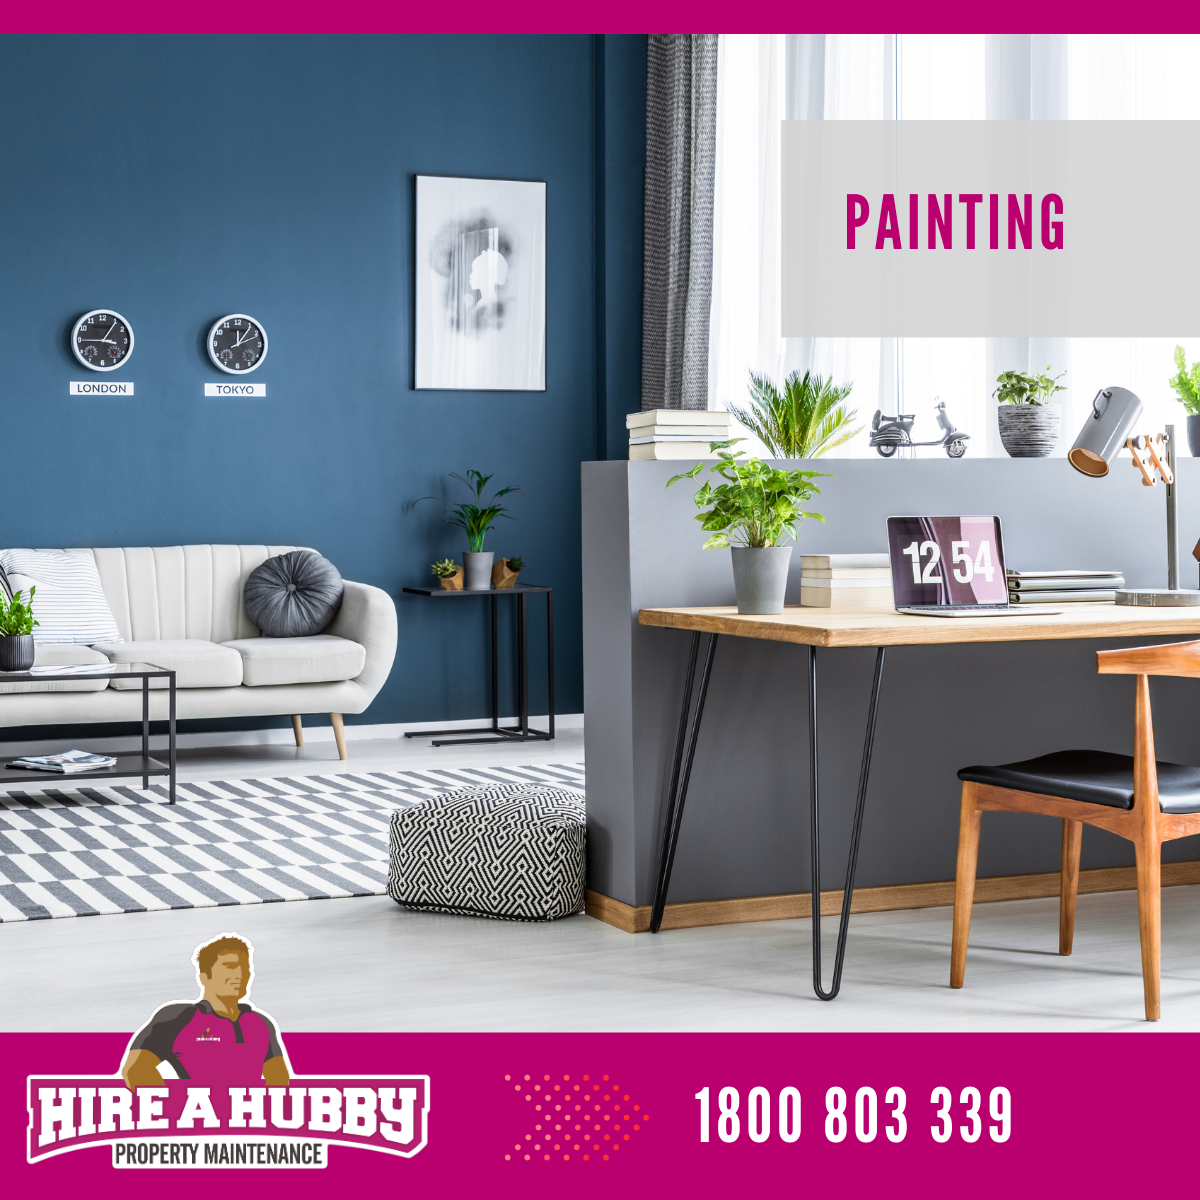 Painting Hire A Hubby Castle Hill Rouse Hill 1800 803 339